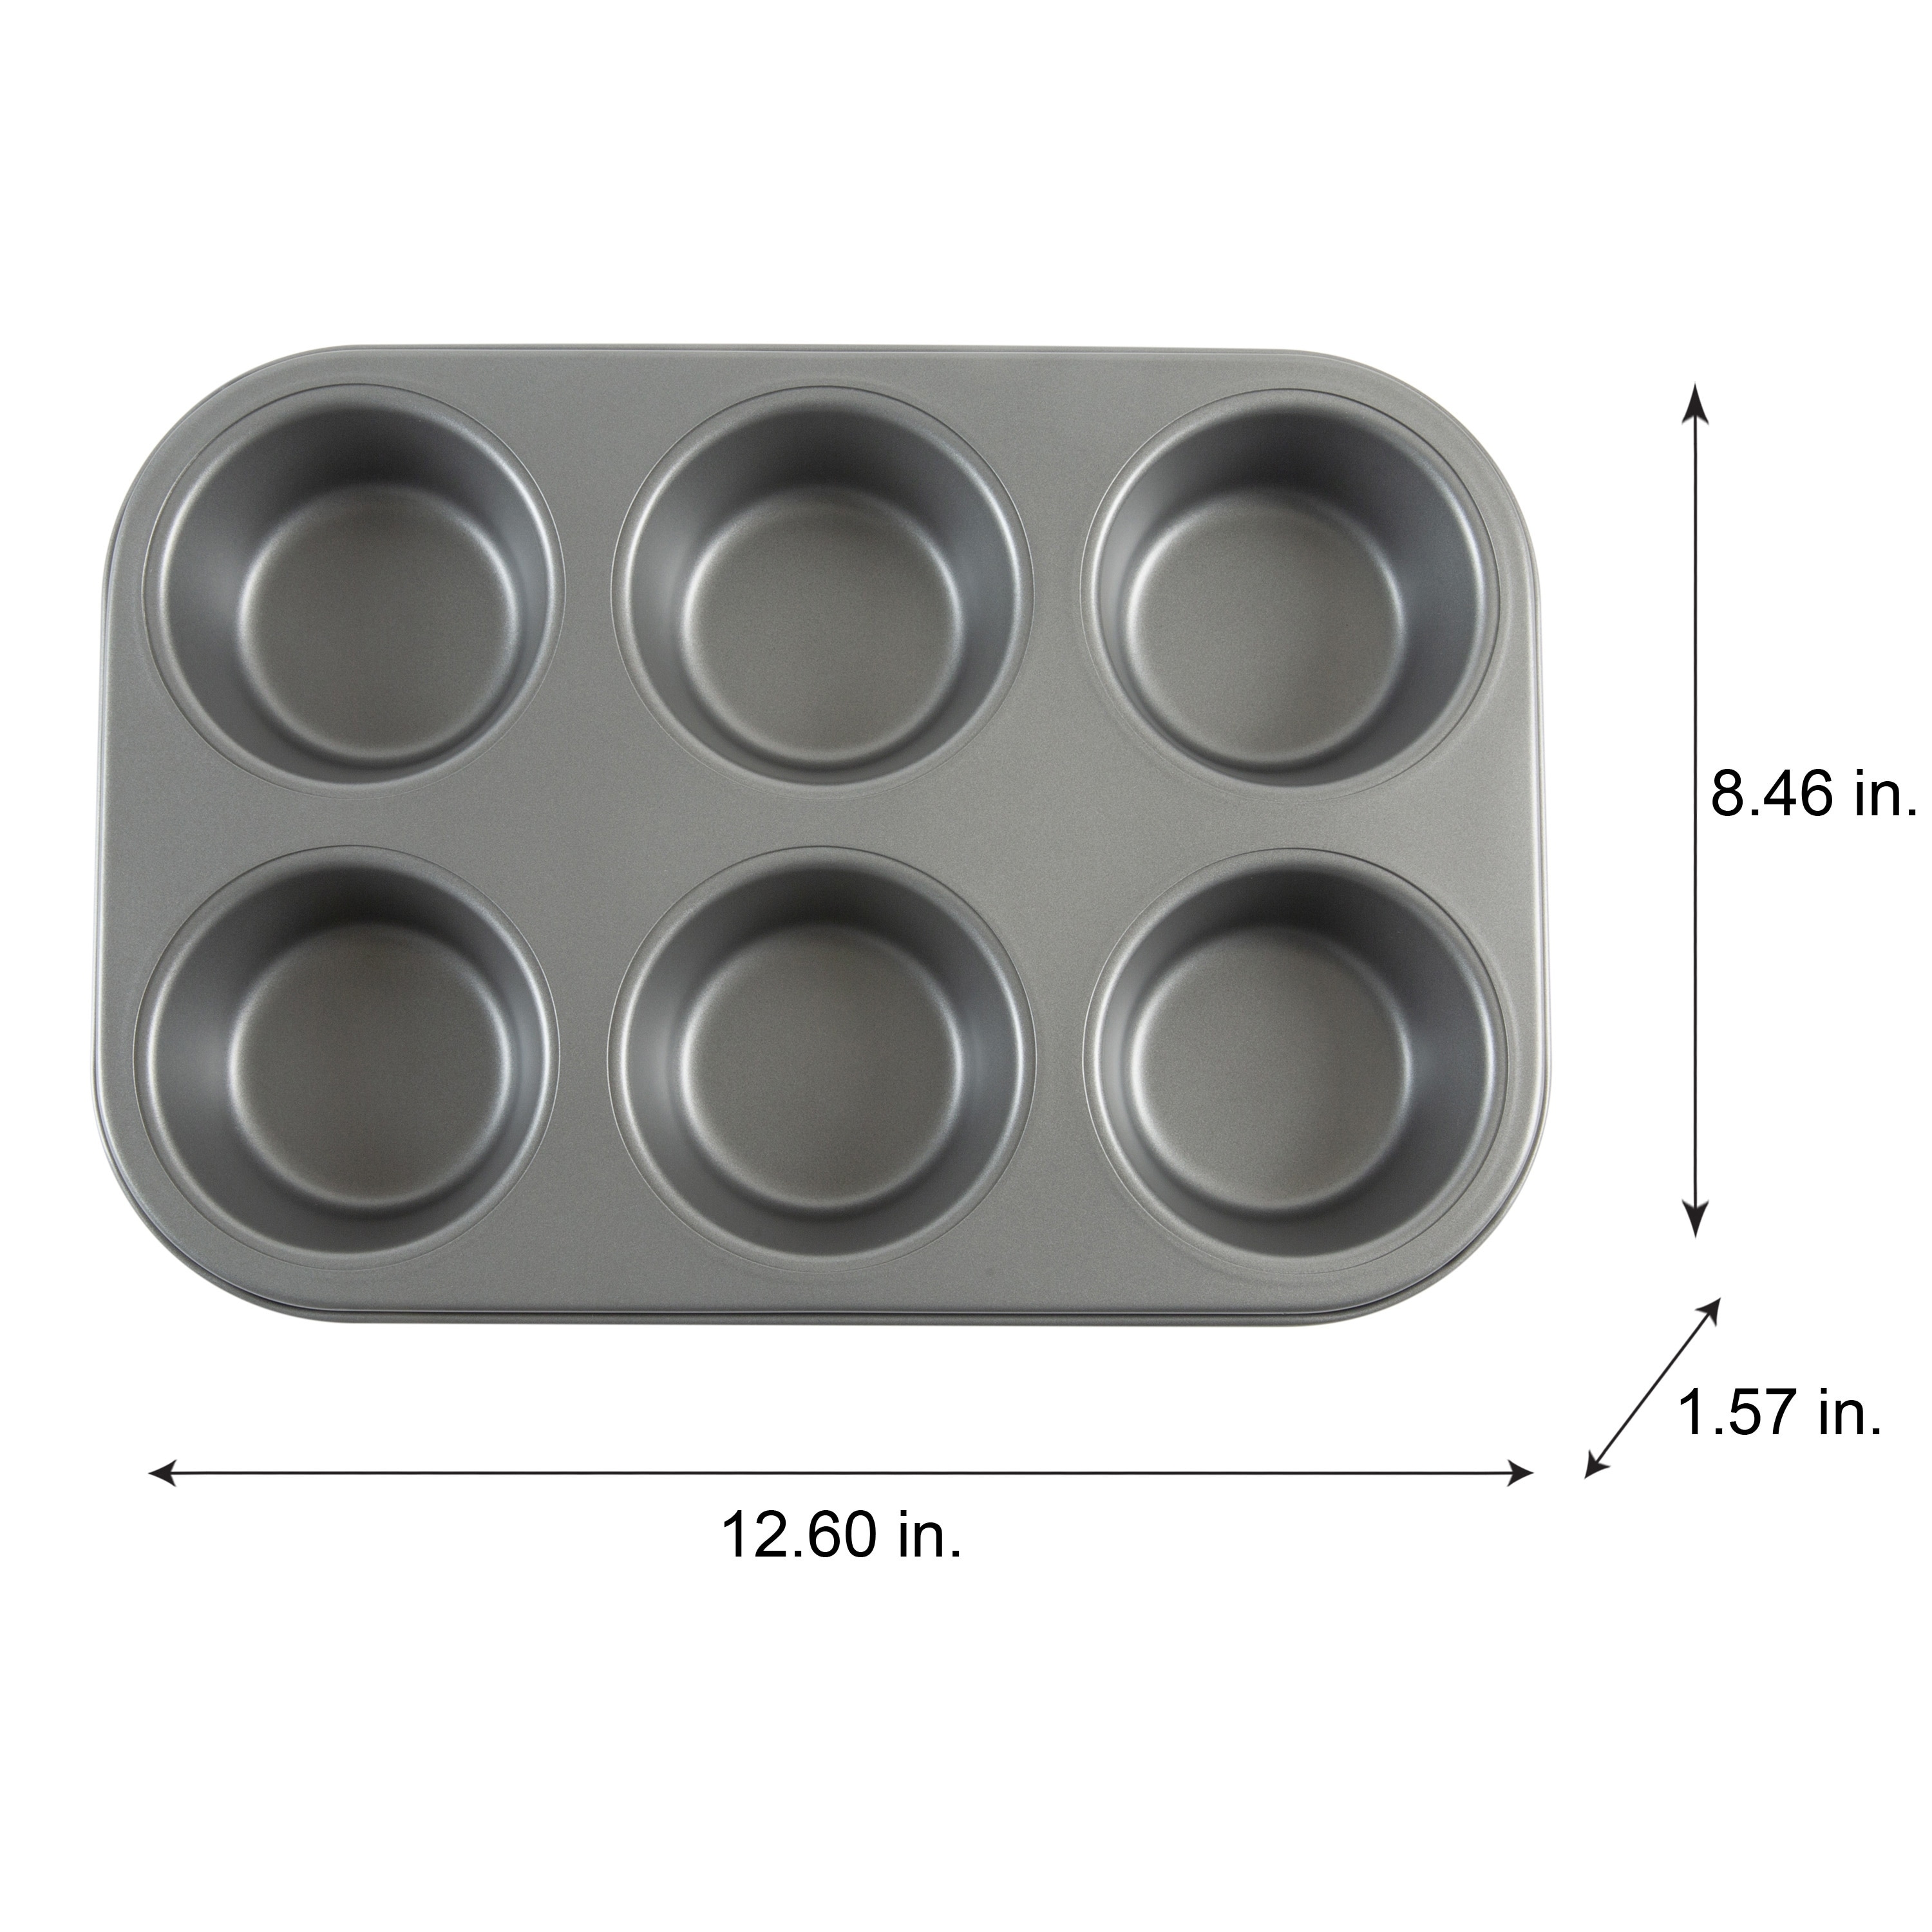 Muffin Cup Trays - Texas Muffin Tins